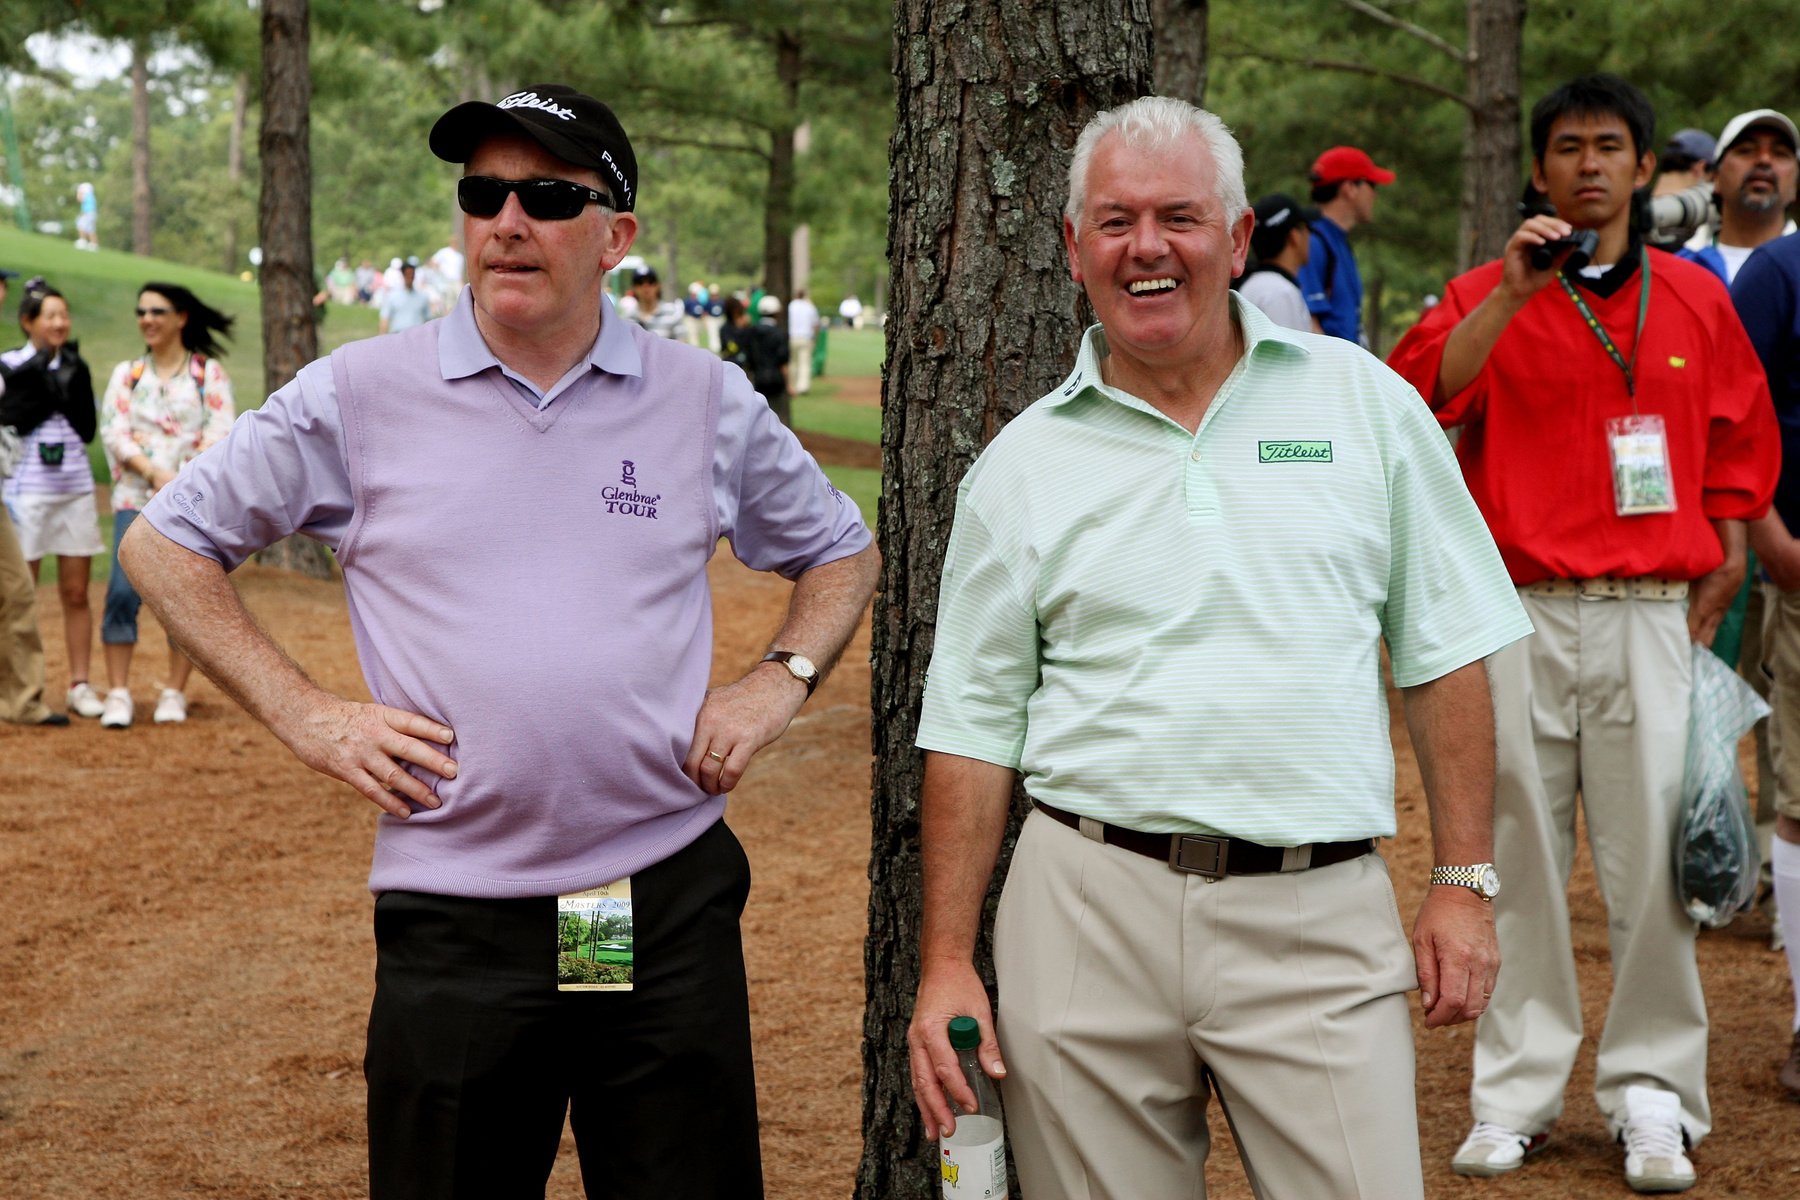 The Masters – Round Two